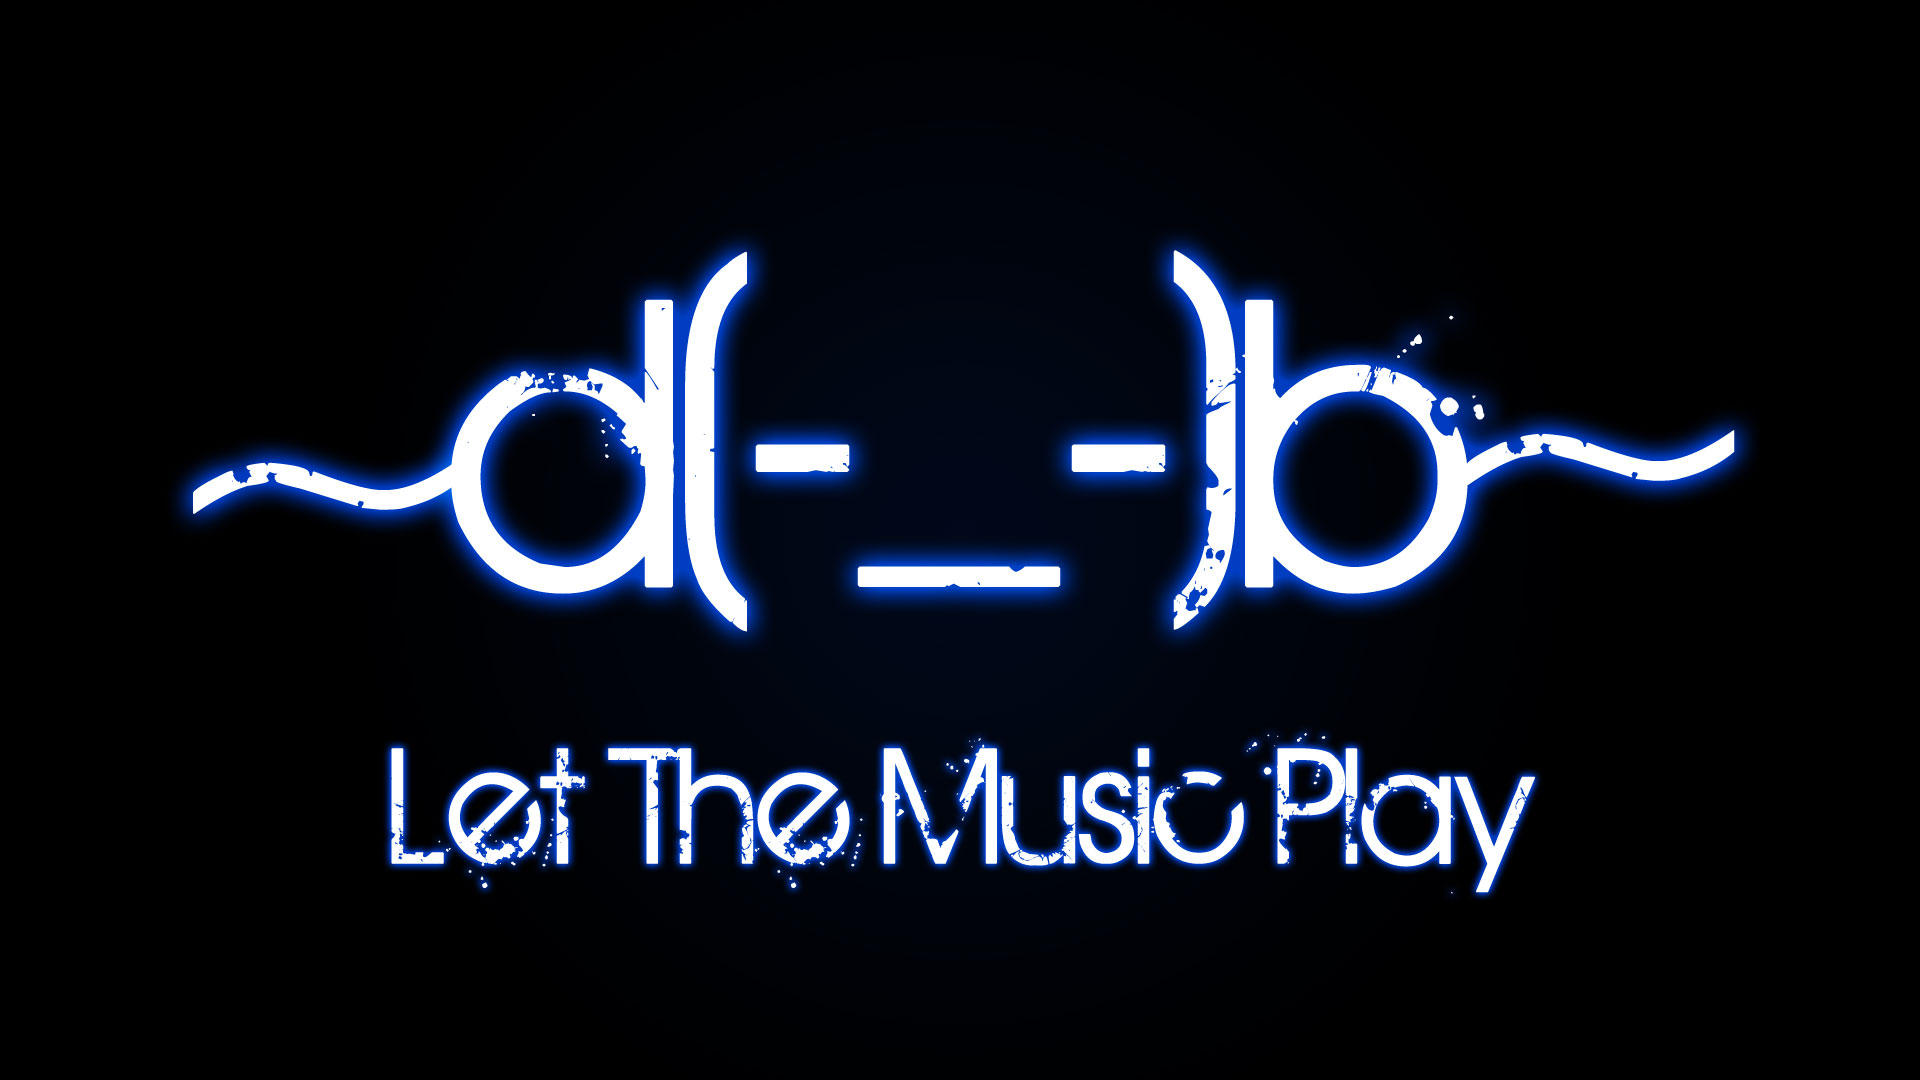 Download this Let The Music Play Hafele picture